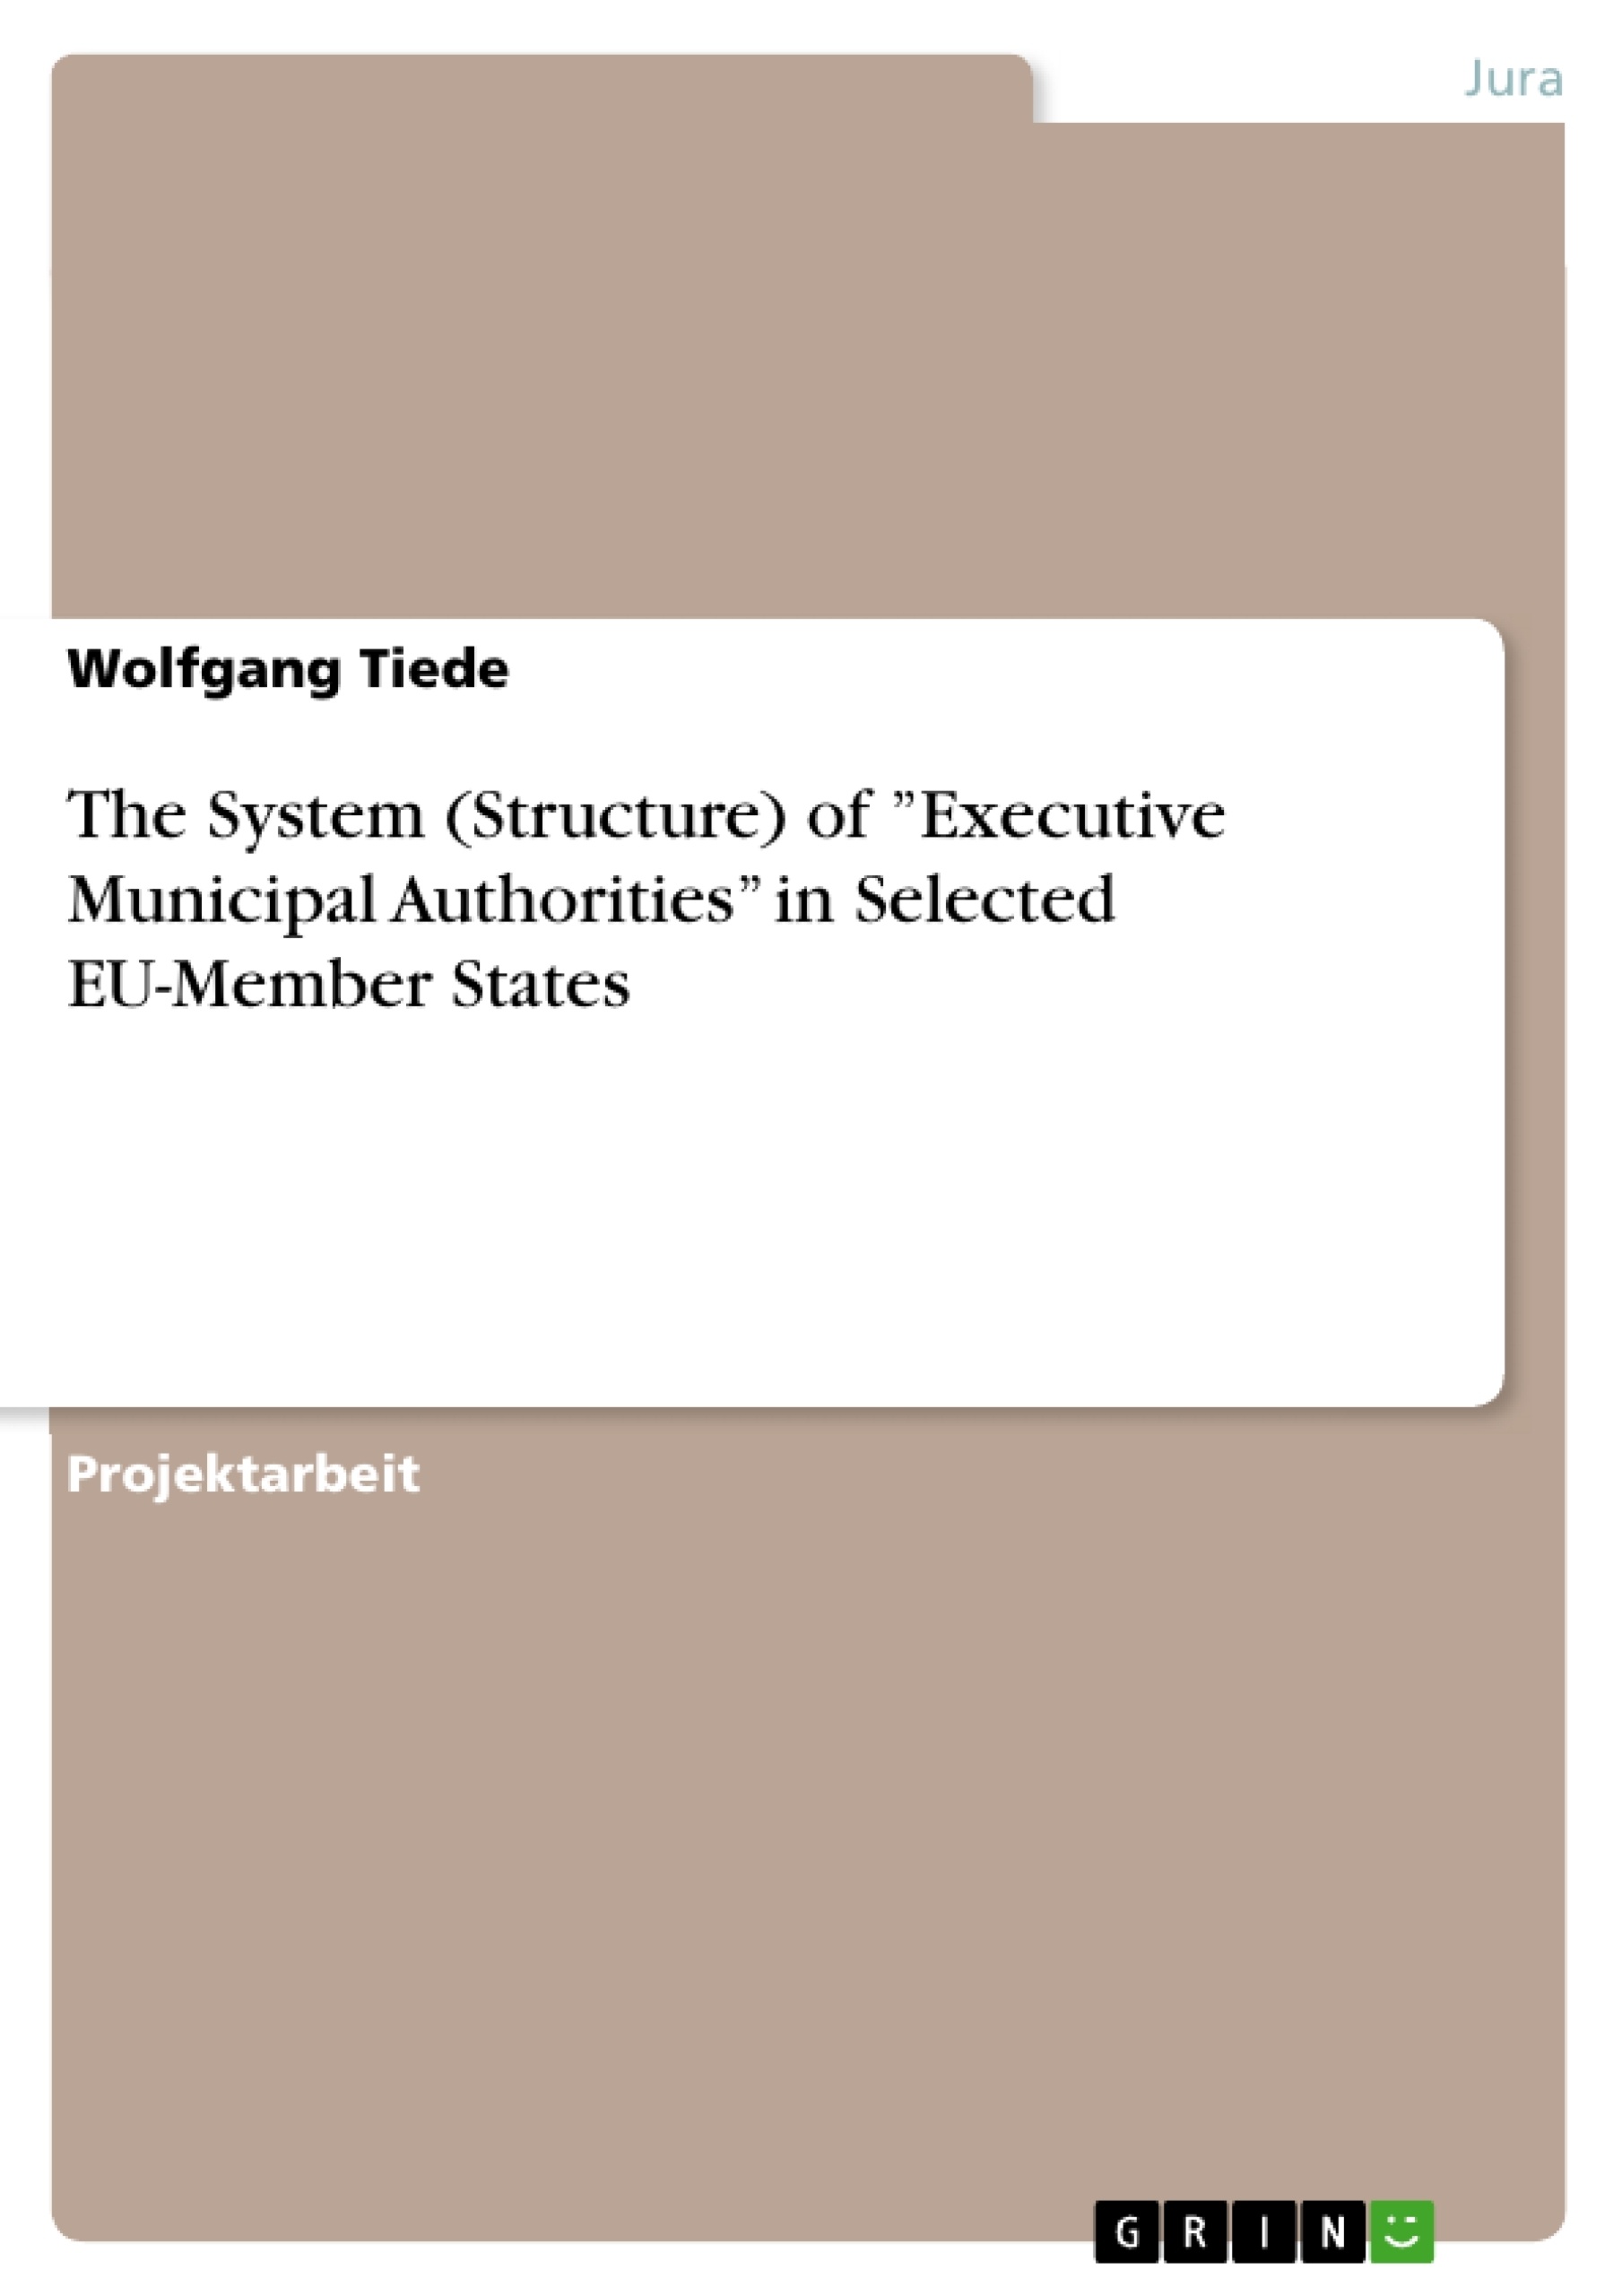 Titel: The System (Structure) of ”Executive Municipal Authorities” in Selected EU-Member States